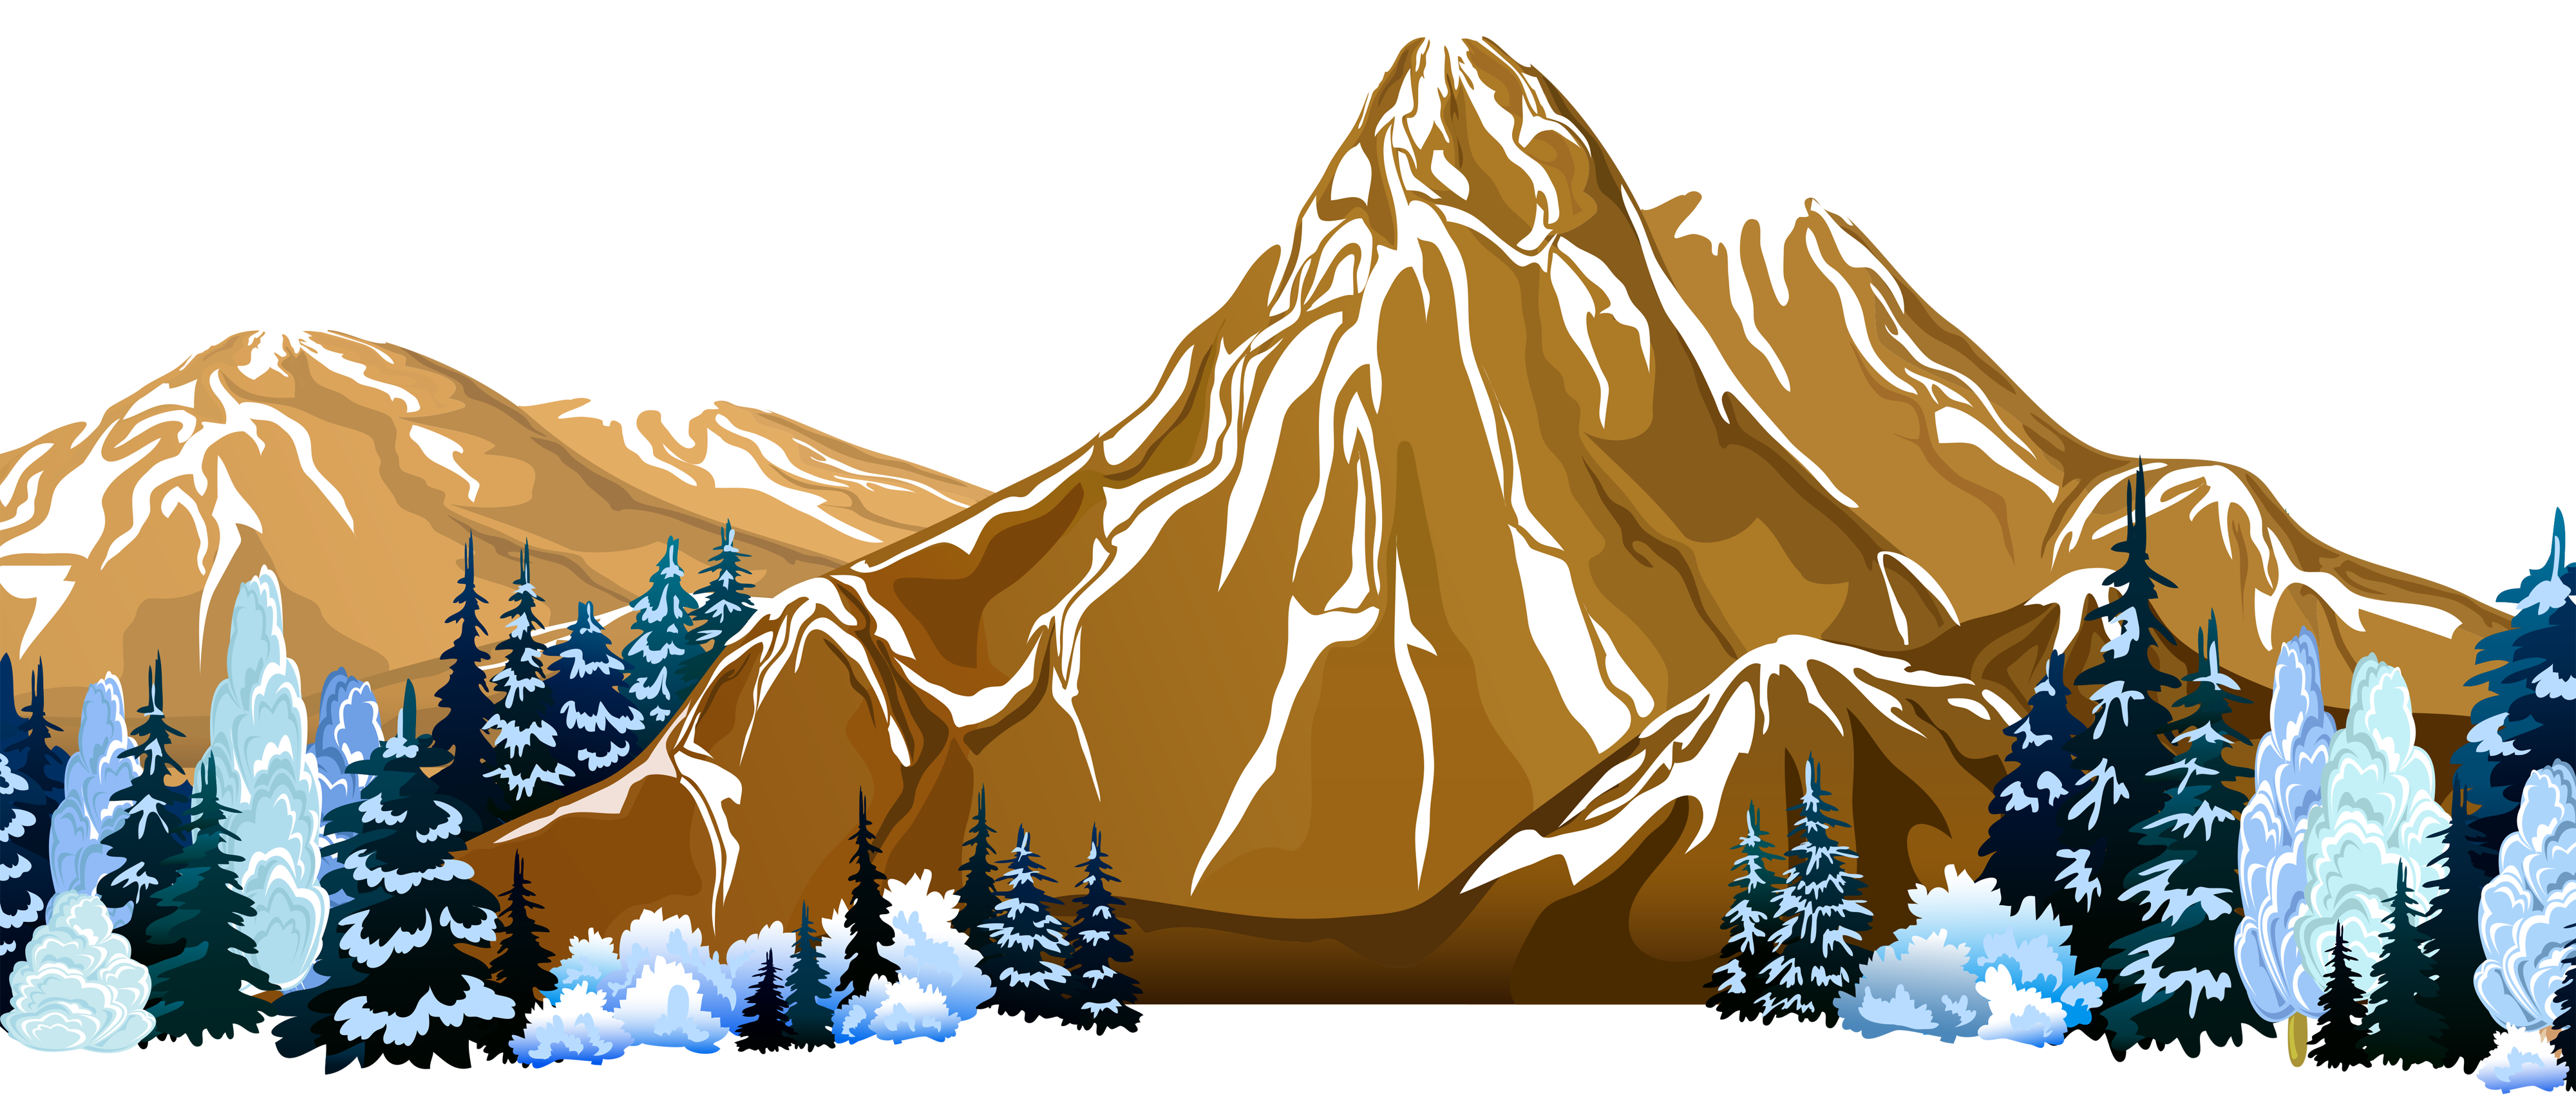 10 Simple Mountain Drawing PNG Transparent  OnlyGFXcom